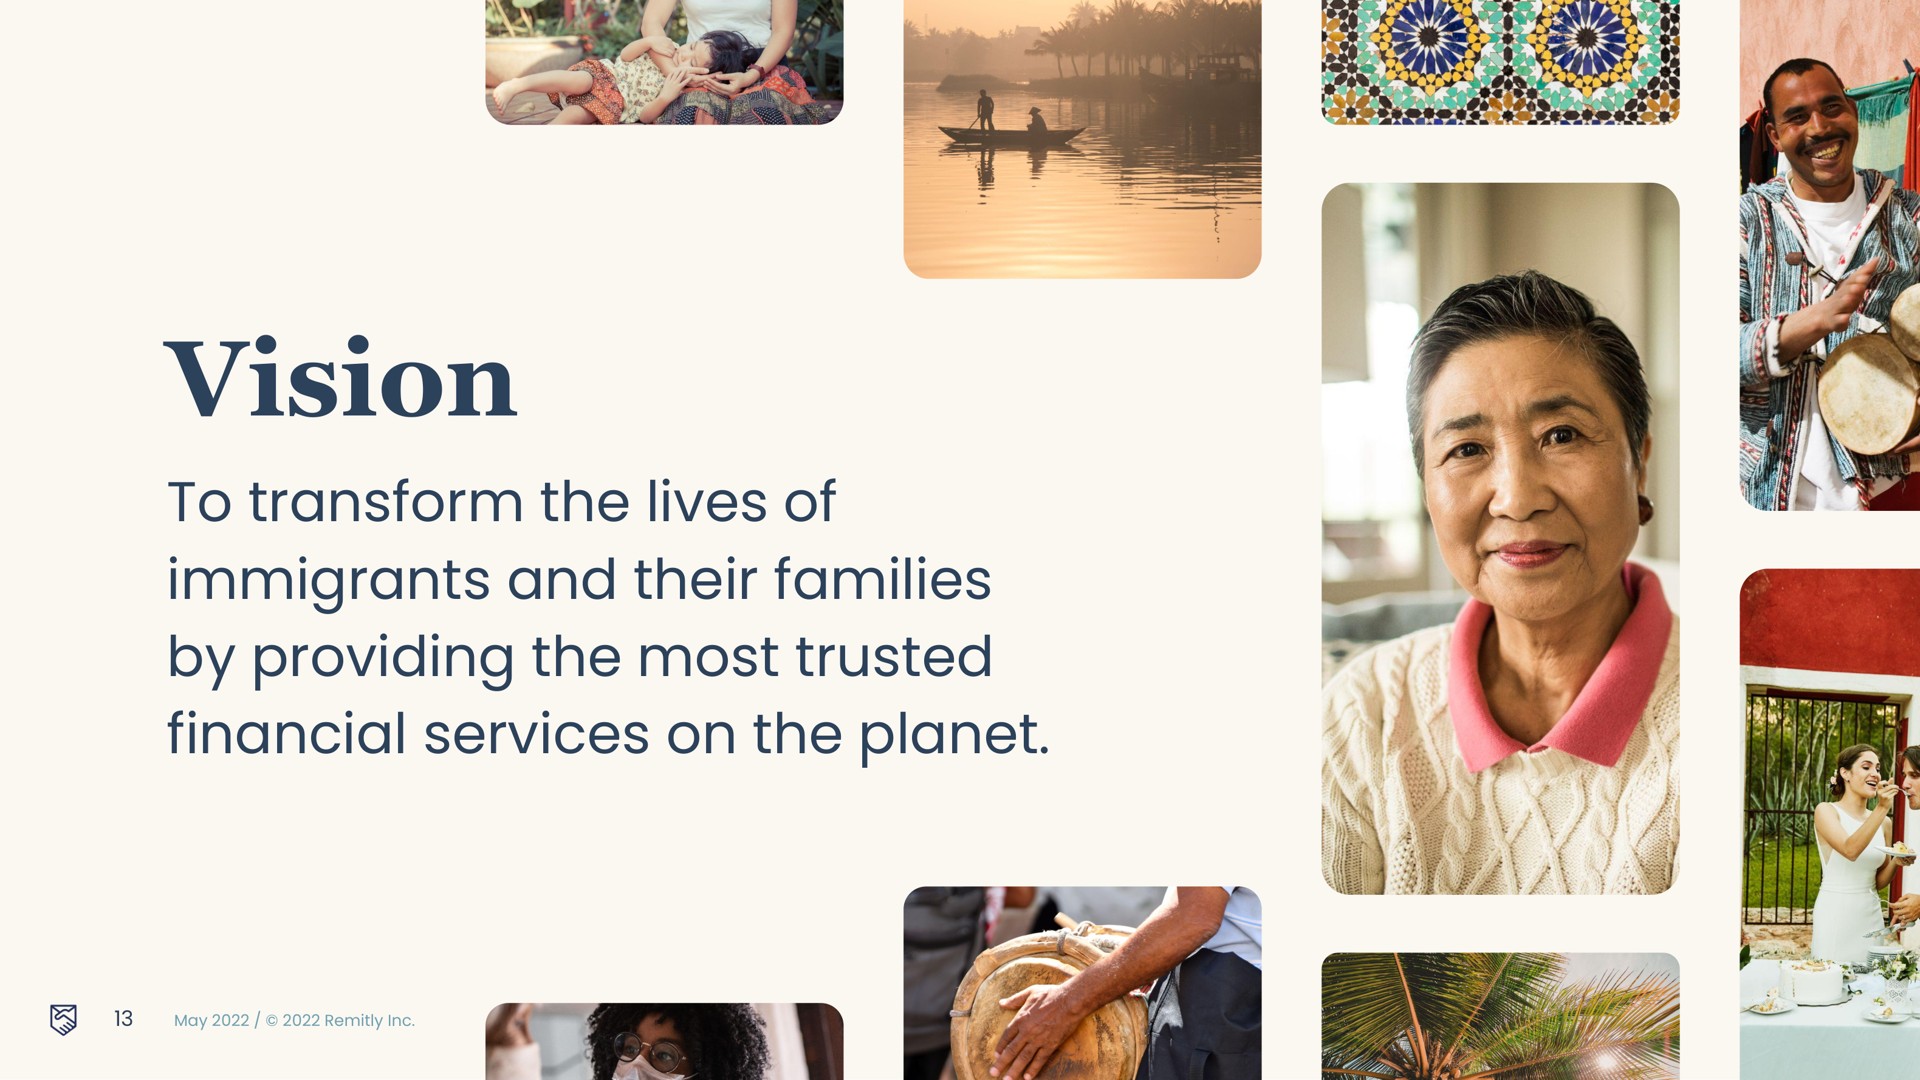 vision to transform the lives of immigrants and their families by providing the most trusted financial services on the planet | Remitly